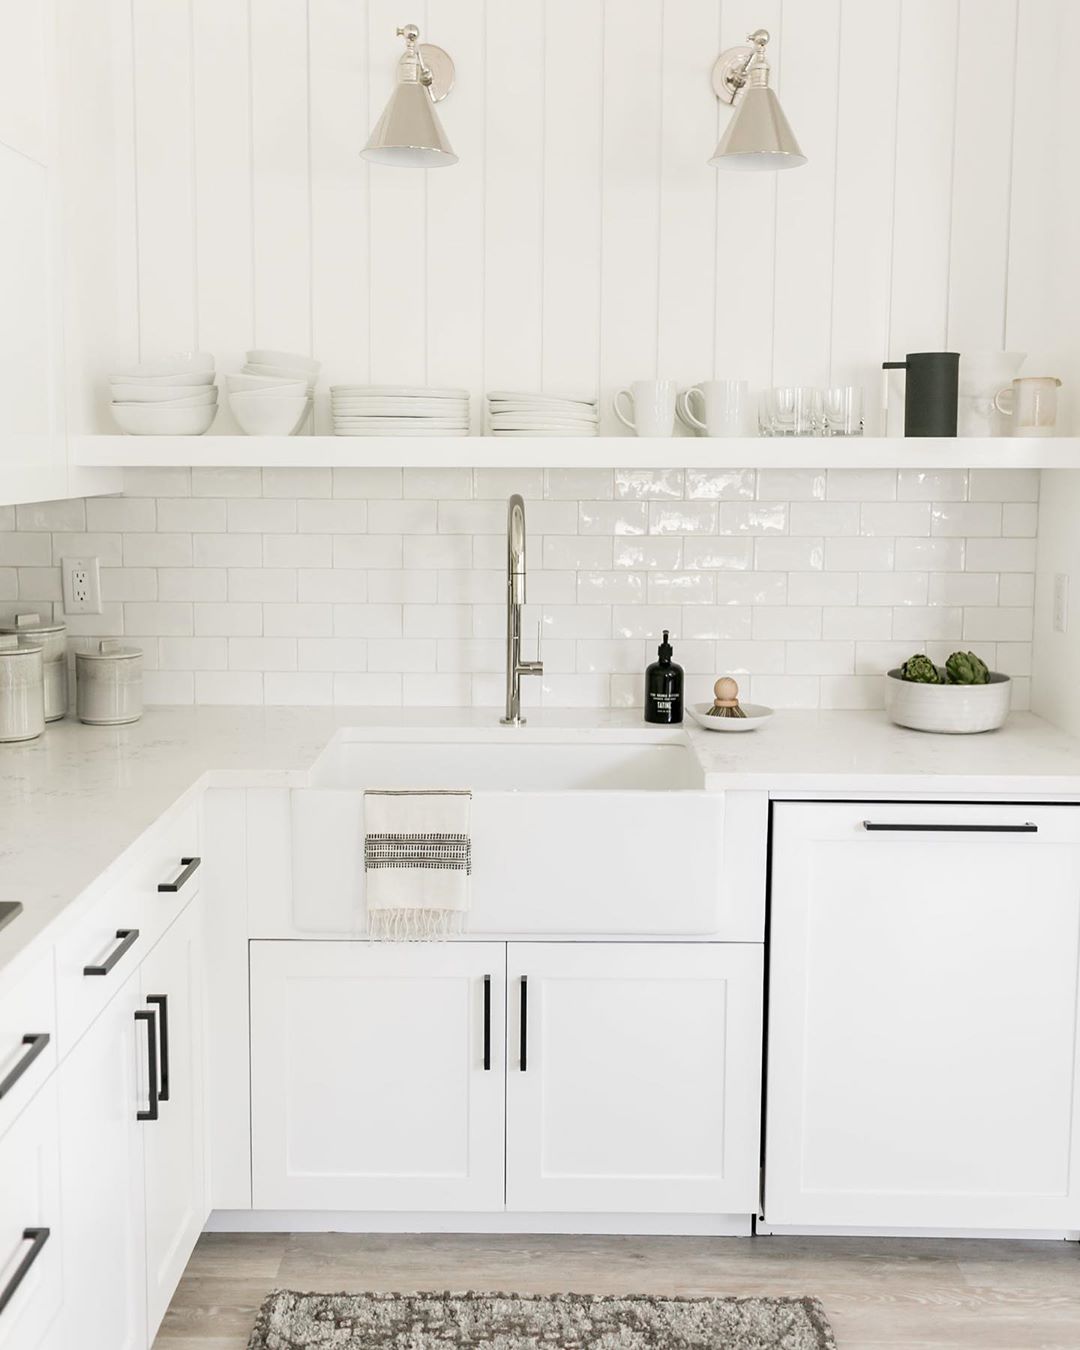 kitchen with white cabinets and white dishware on shelves